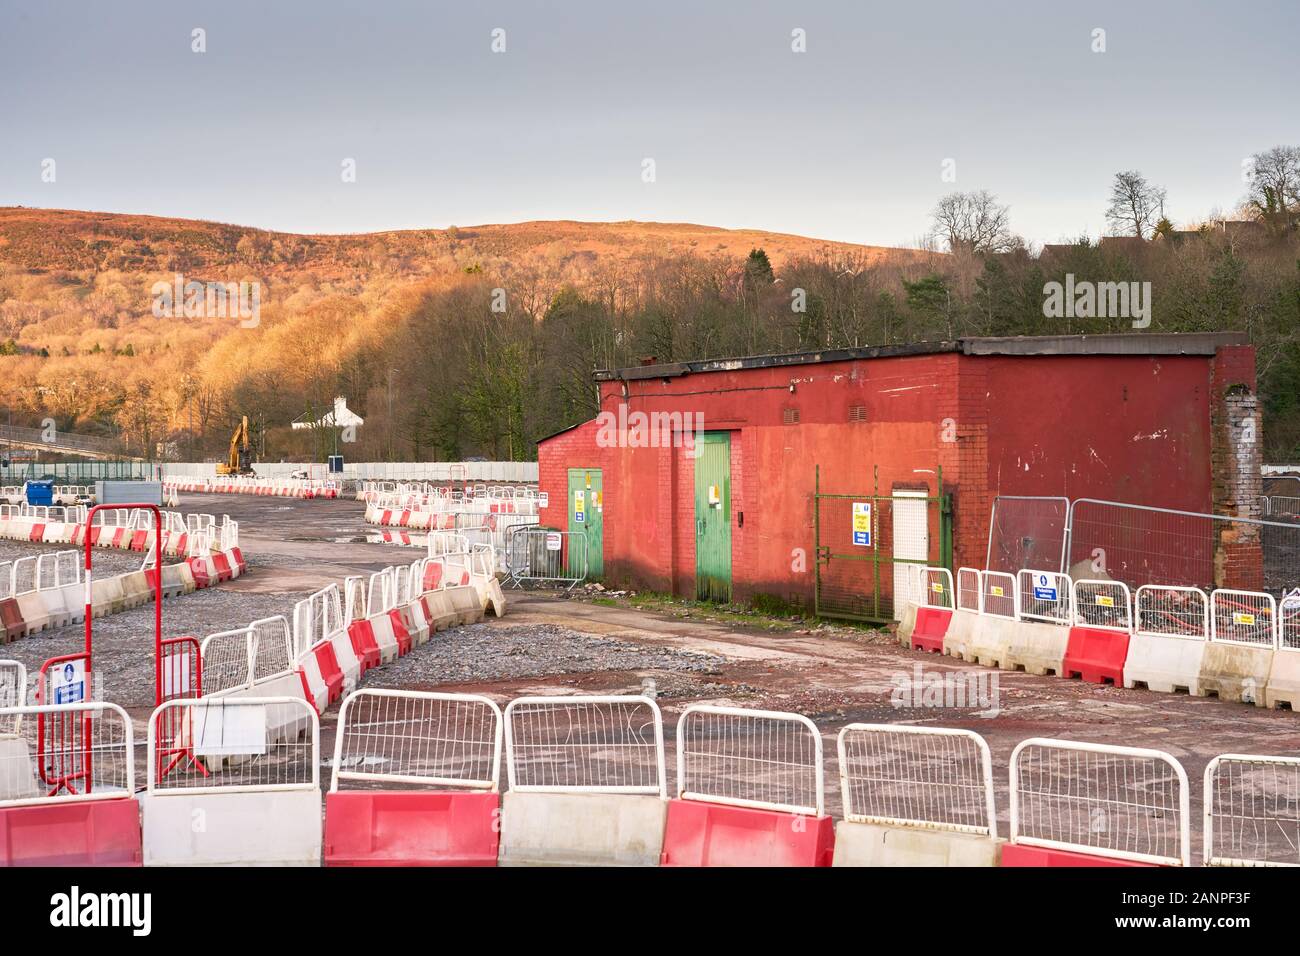 Site of the new £100 million metro depot at Taff's Well, South Wales Stock Photo